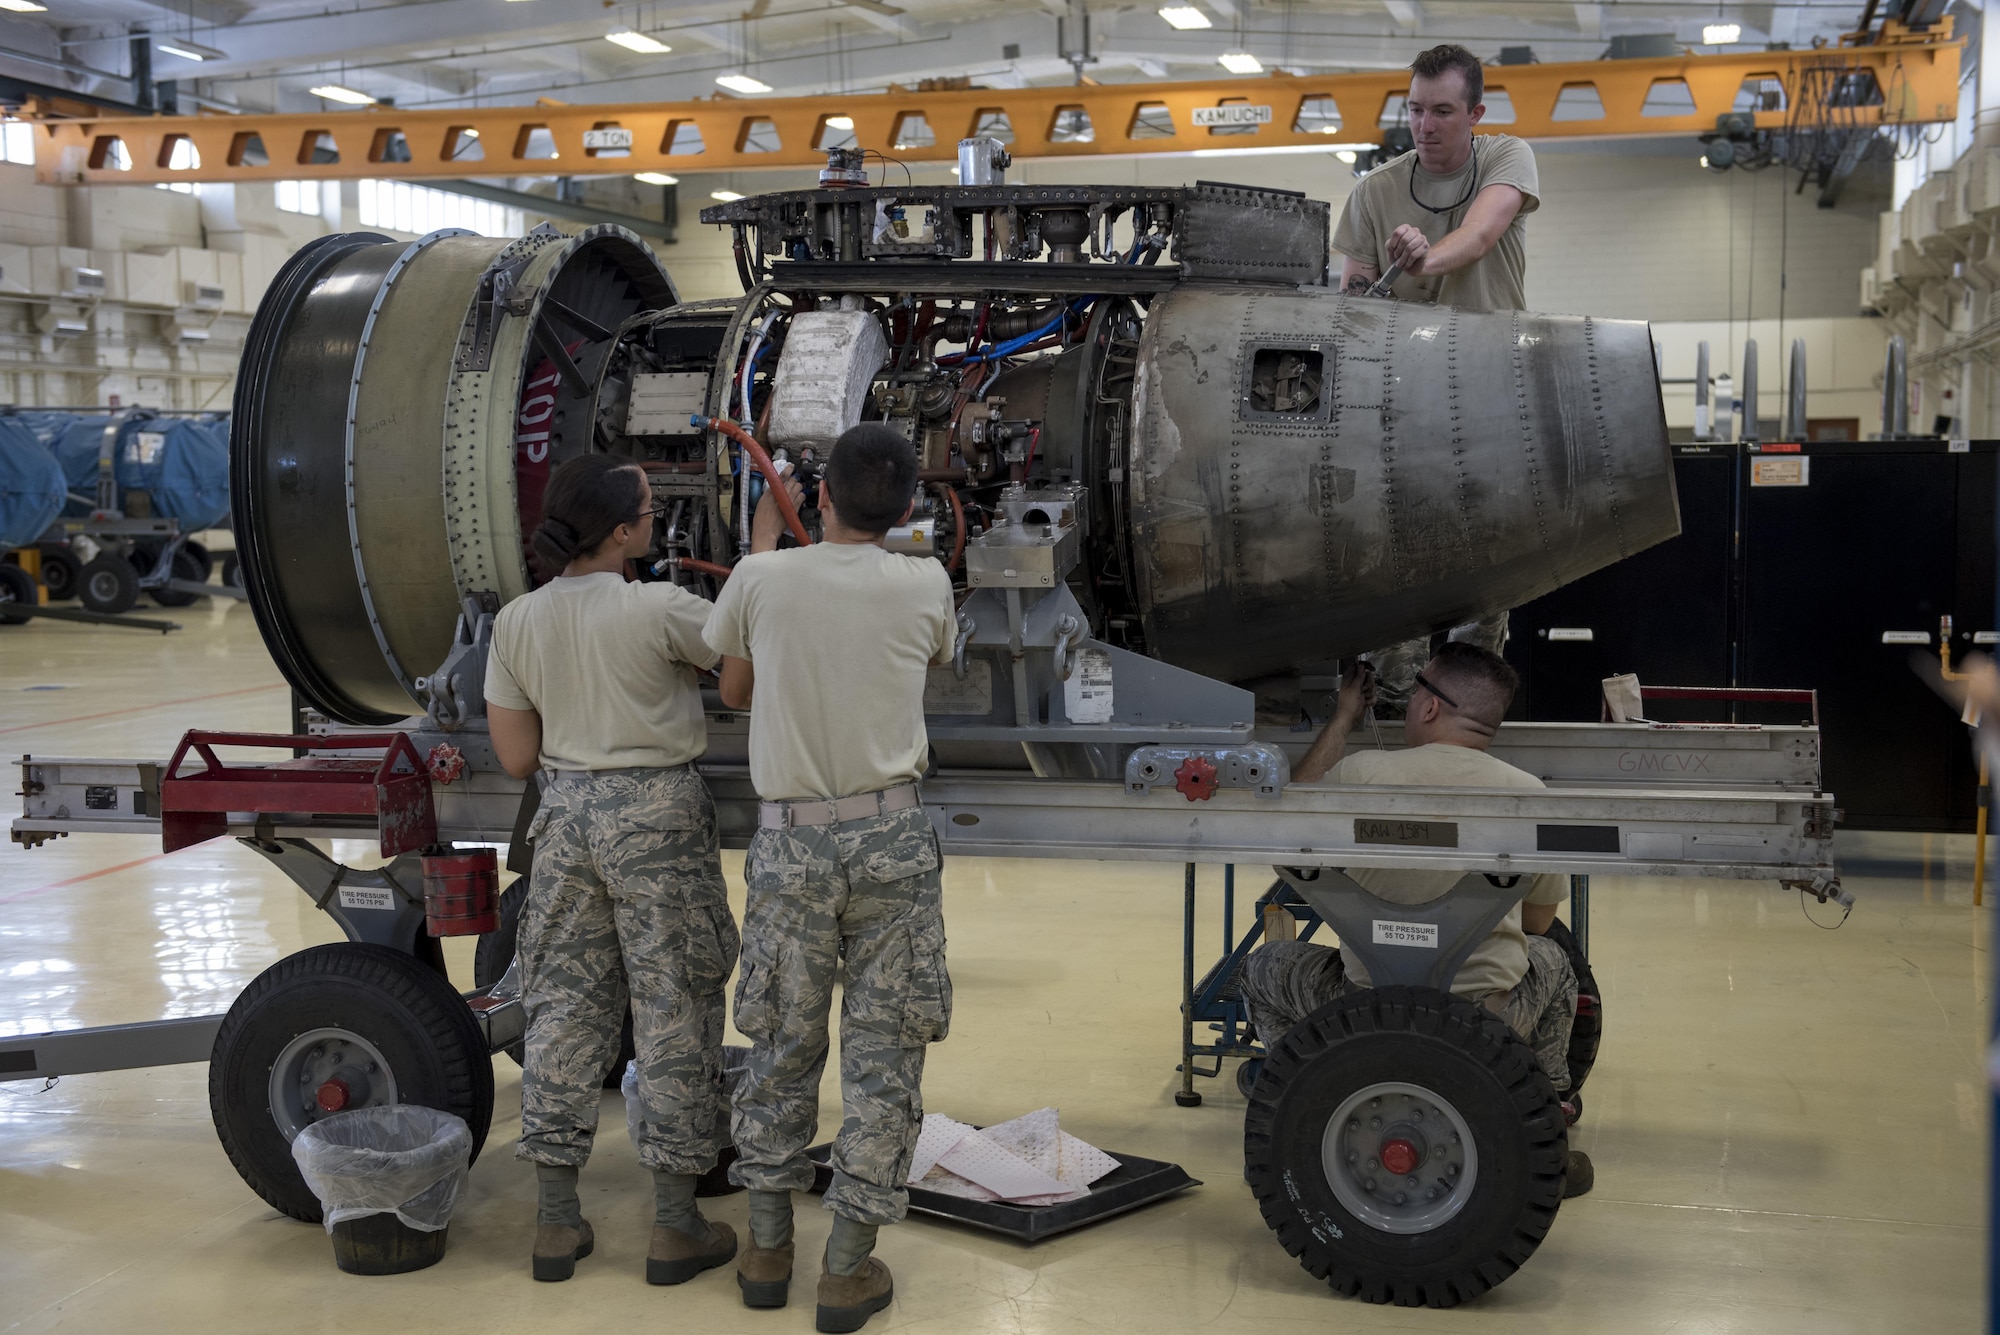 Aerospace propulsion technicians from the 18th Component Maintenance Squadron service an A-10 Thunderbolt II engine July 6, 2017, at Kadena Air Base, Japan. The Airmen performed preventative maintenance, which requires them to completely deconstruct the engine prior to rebuilding it. (U.S. Air Force photo by Senior Airman John Linzmeier)